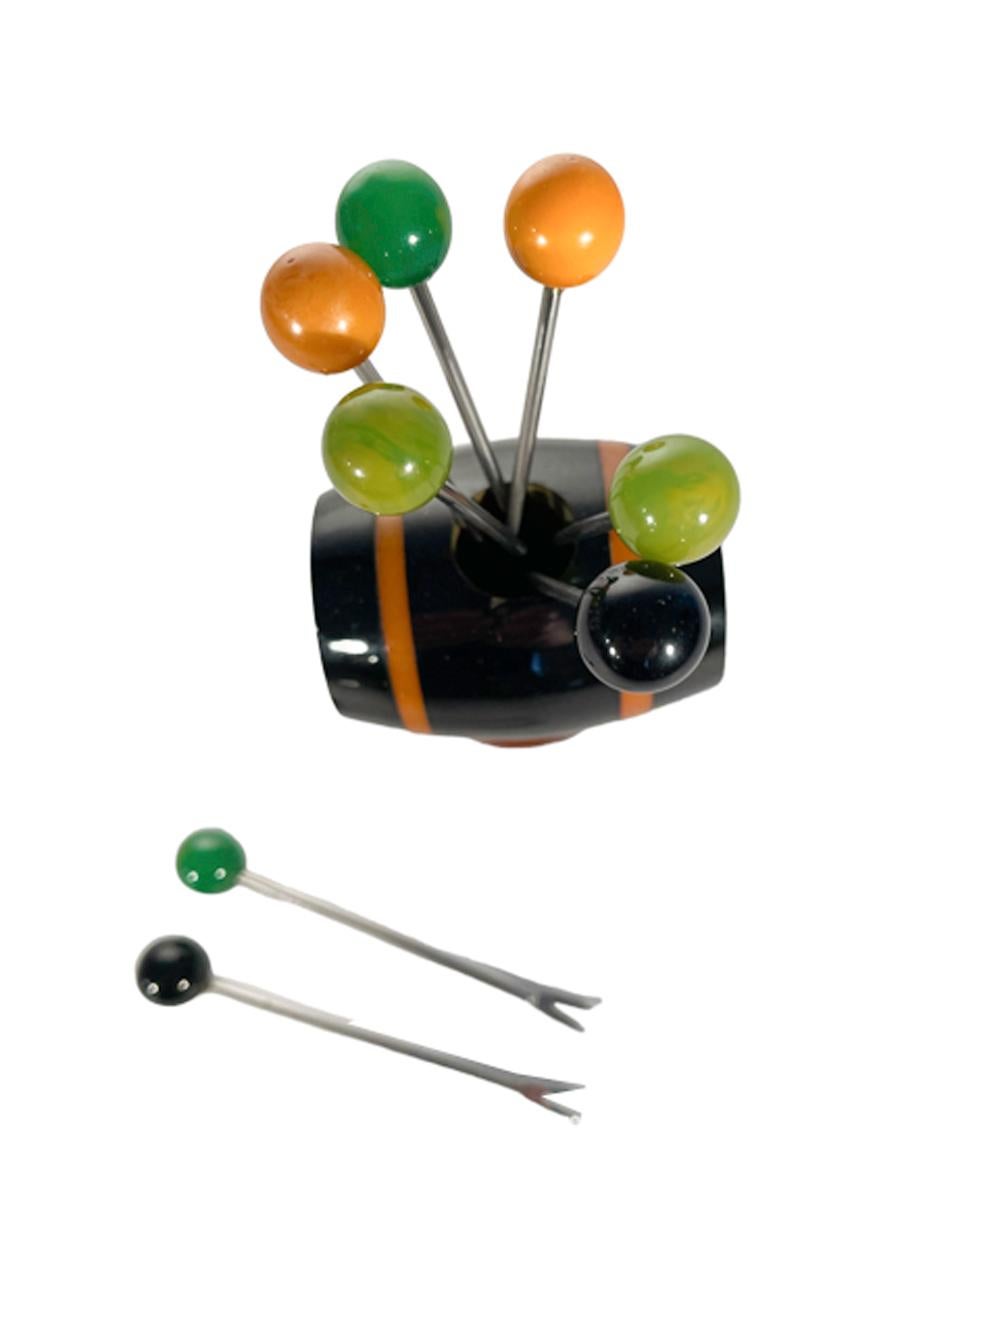 Art Deco whiskey keg cocktail pick set, the 8 picks with Bakelite ball tops, 2 each of four colors stand in a dark brown Bakelite keg with butterscotch bands which rests on its side atop a cylindrical dark brown base with an round amber foot.